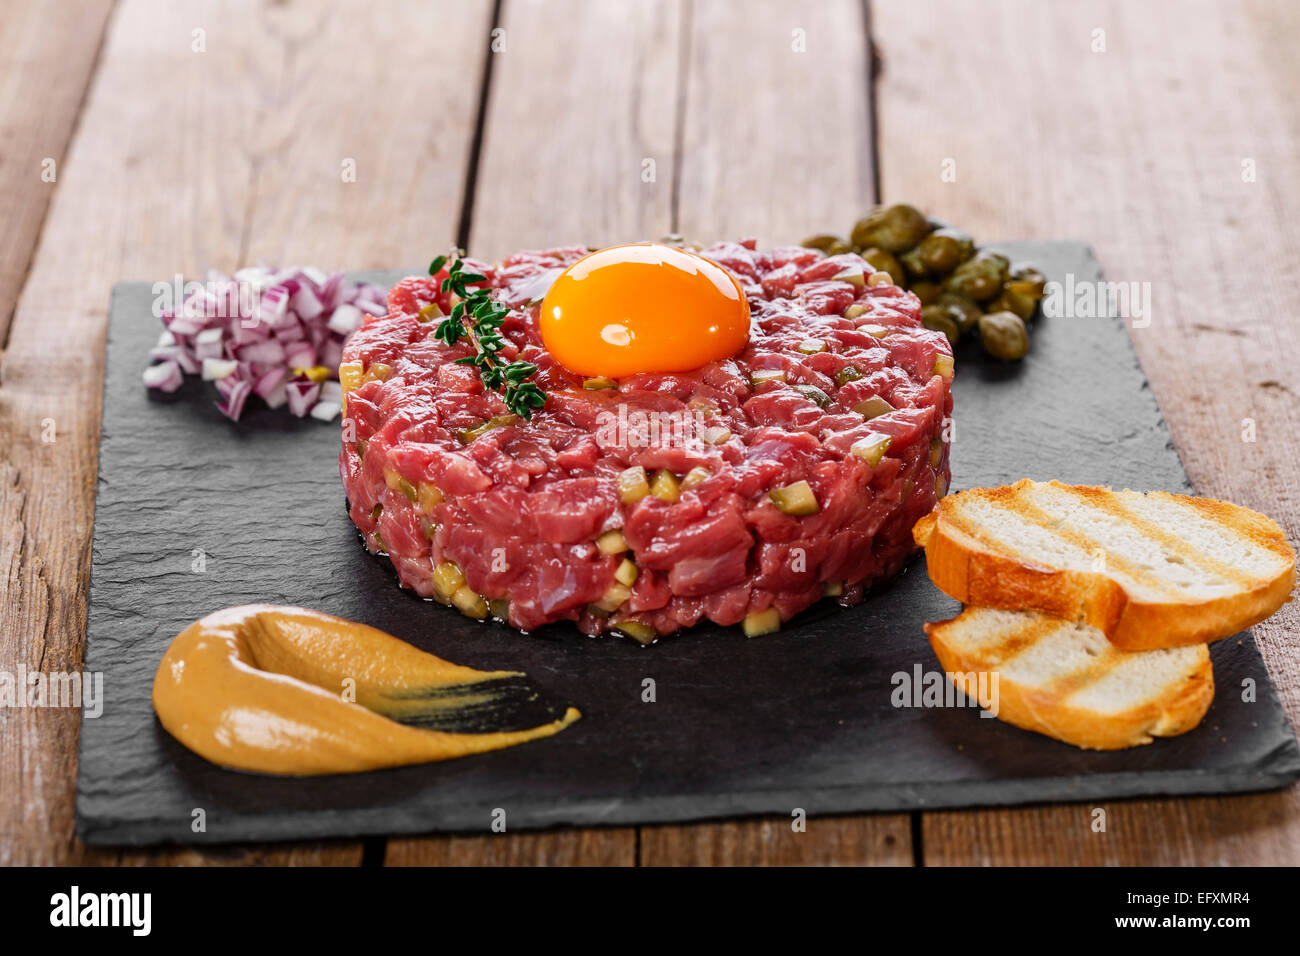 Beef tartare with capers yolk and mustard Stock Photo